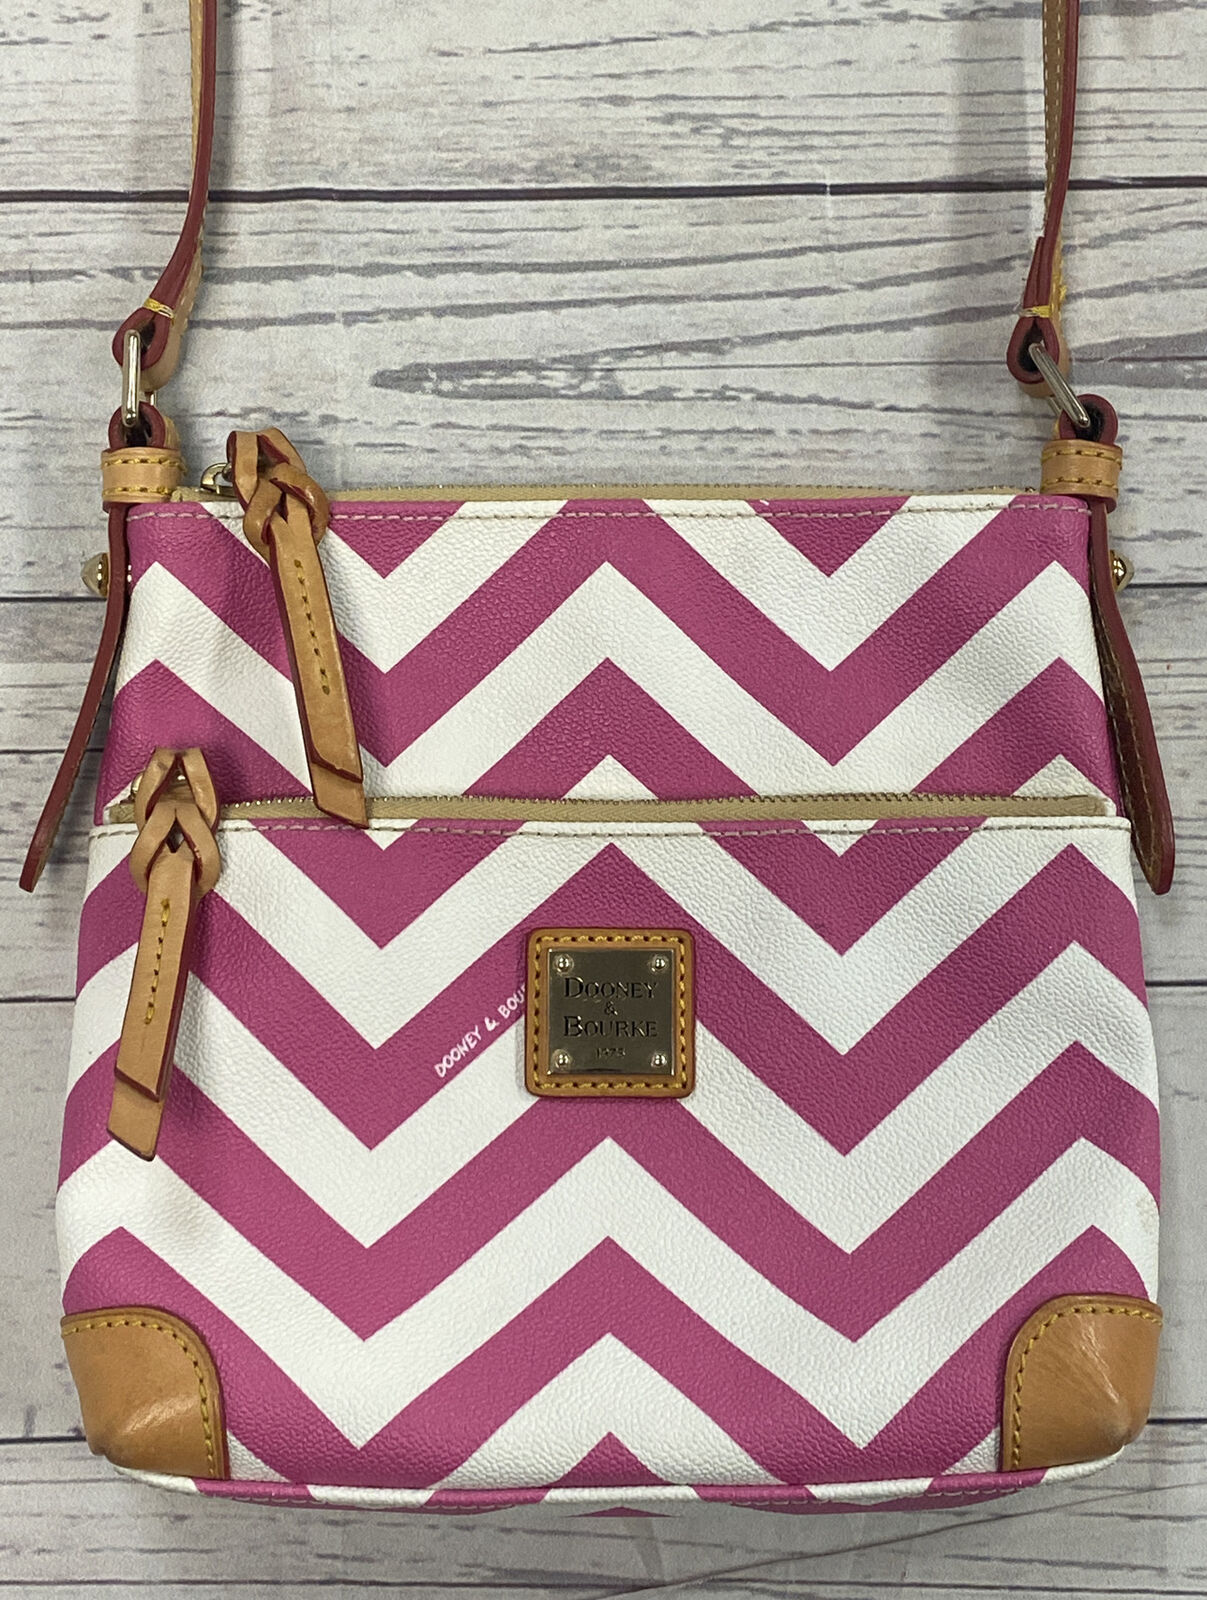 Dooney & Bourke Red and White Chevron Striped Leather Crossbody Shoulder Bag